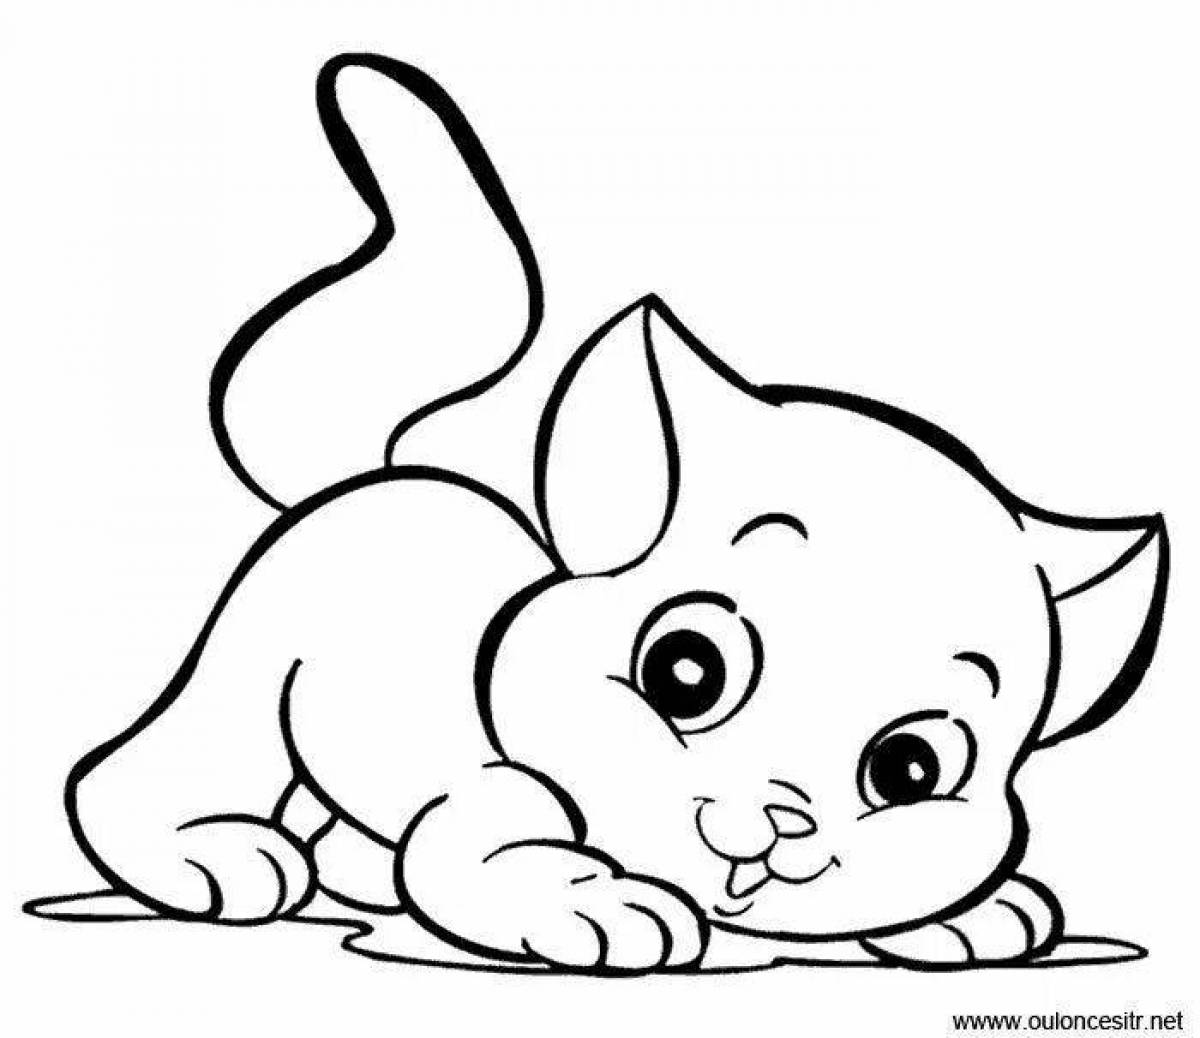 Coloring book shiny cat and hare